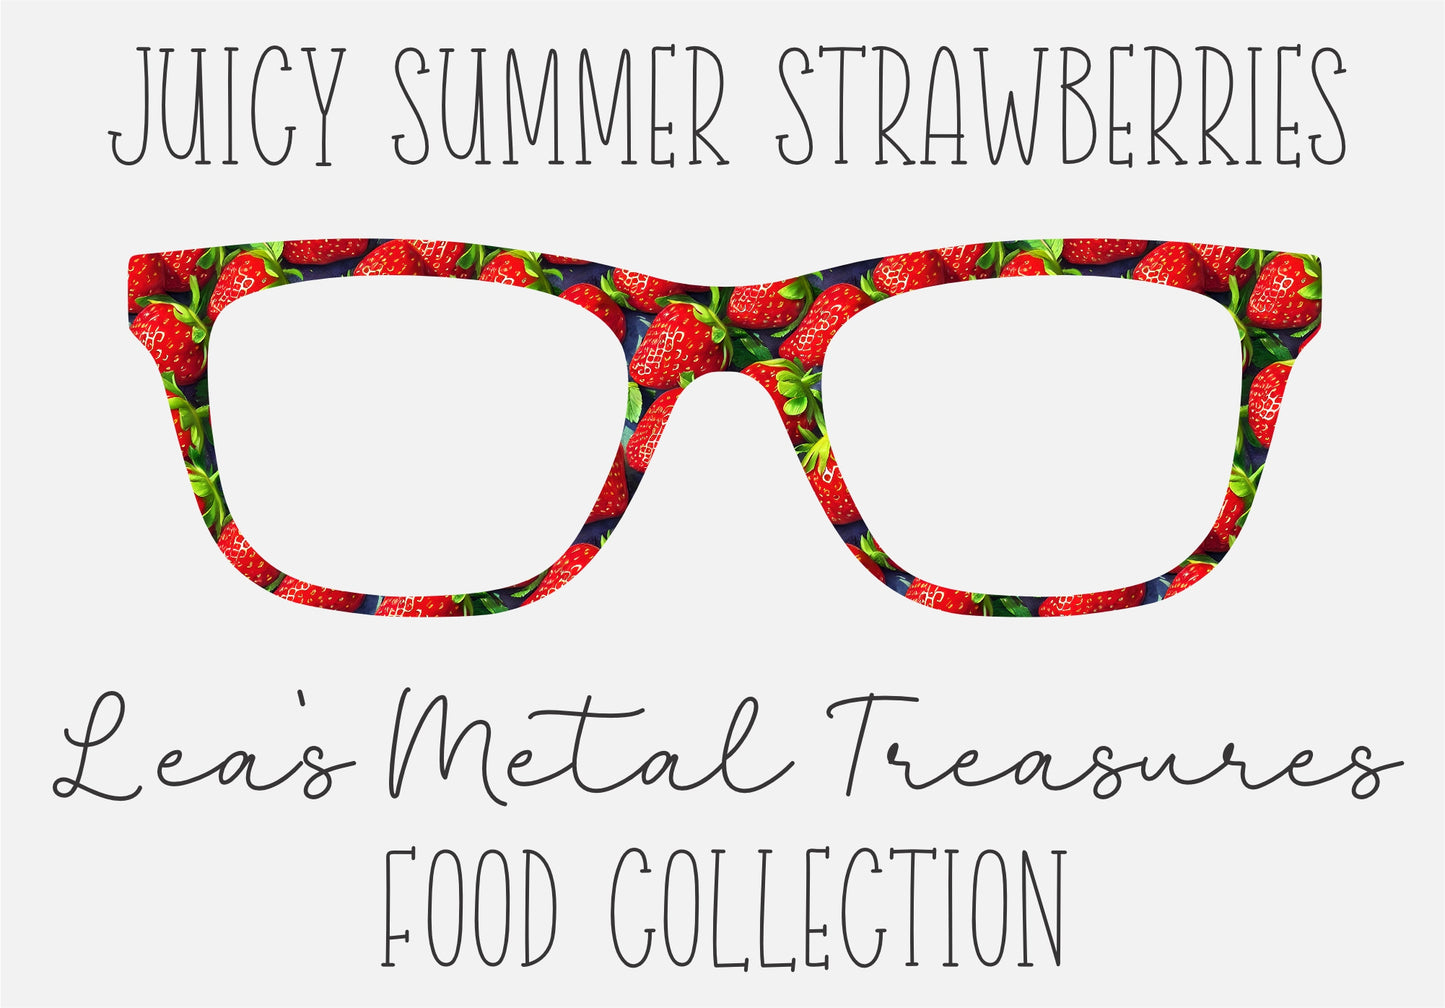 Juicy Summer Strawberries Frame Toppers COMES WITH MAGNETS